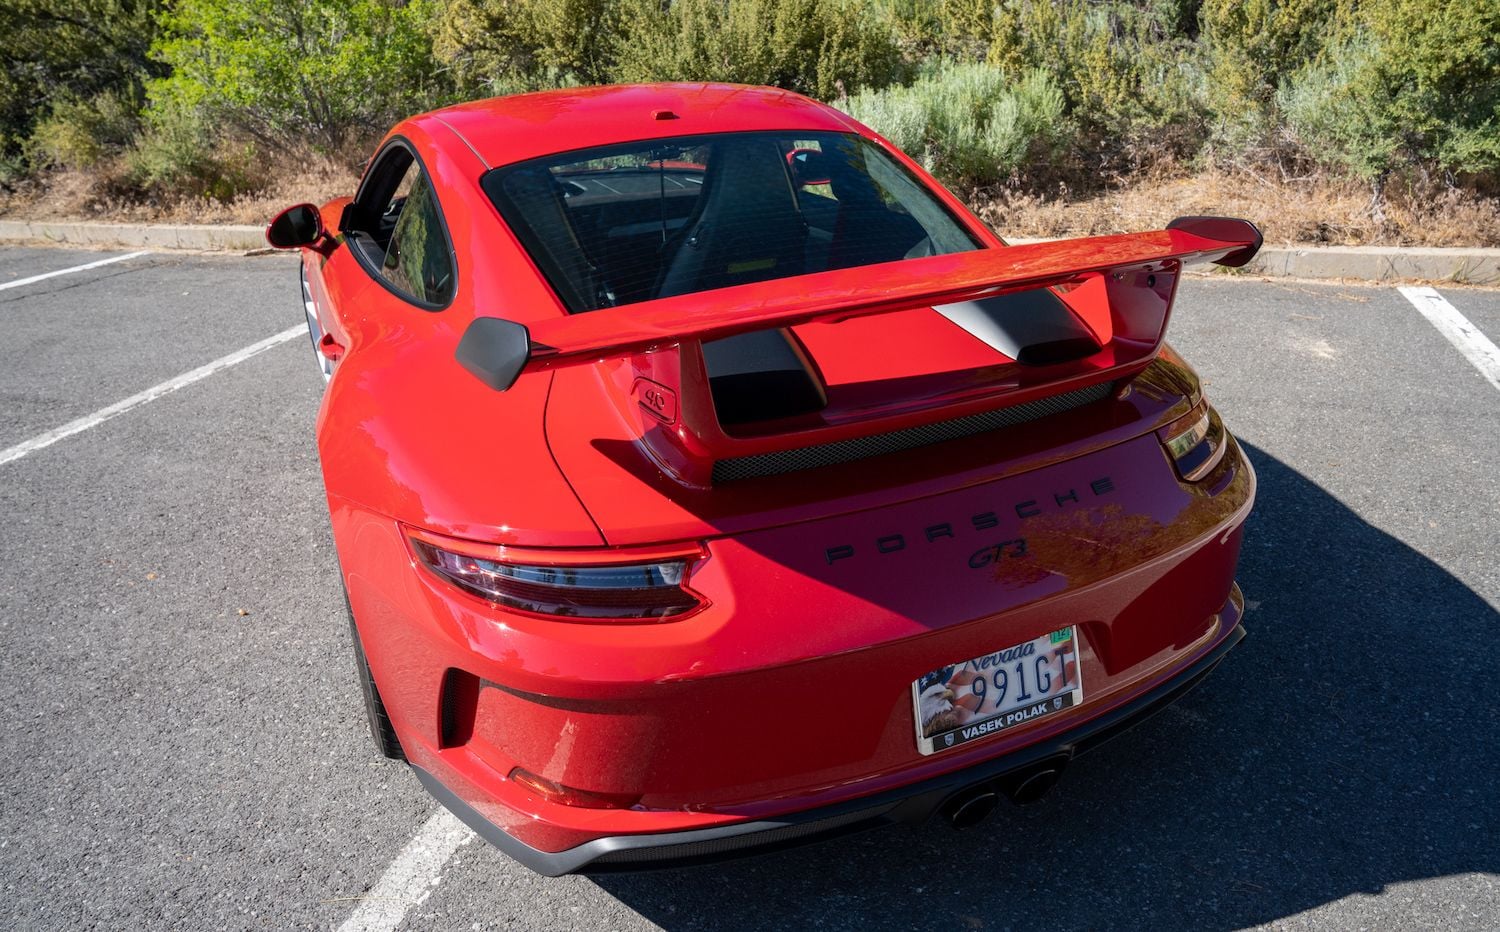 2018 Porsche GT3 - 911 GT3 991.2 Carmine Red , Leather , PCCB ,Lift ,7500 Mi  18 Way , LED ,ETC + - Used - VIN WP0AC2A93JS174218 - 7,500 Miles - 6 cyl - 2WD - Automatic - Coupe - Red - Reno, NV 89511, United States